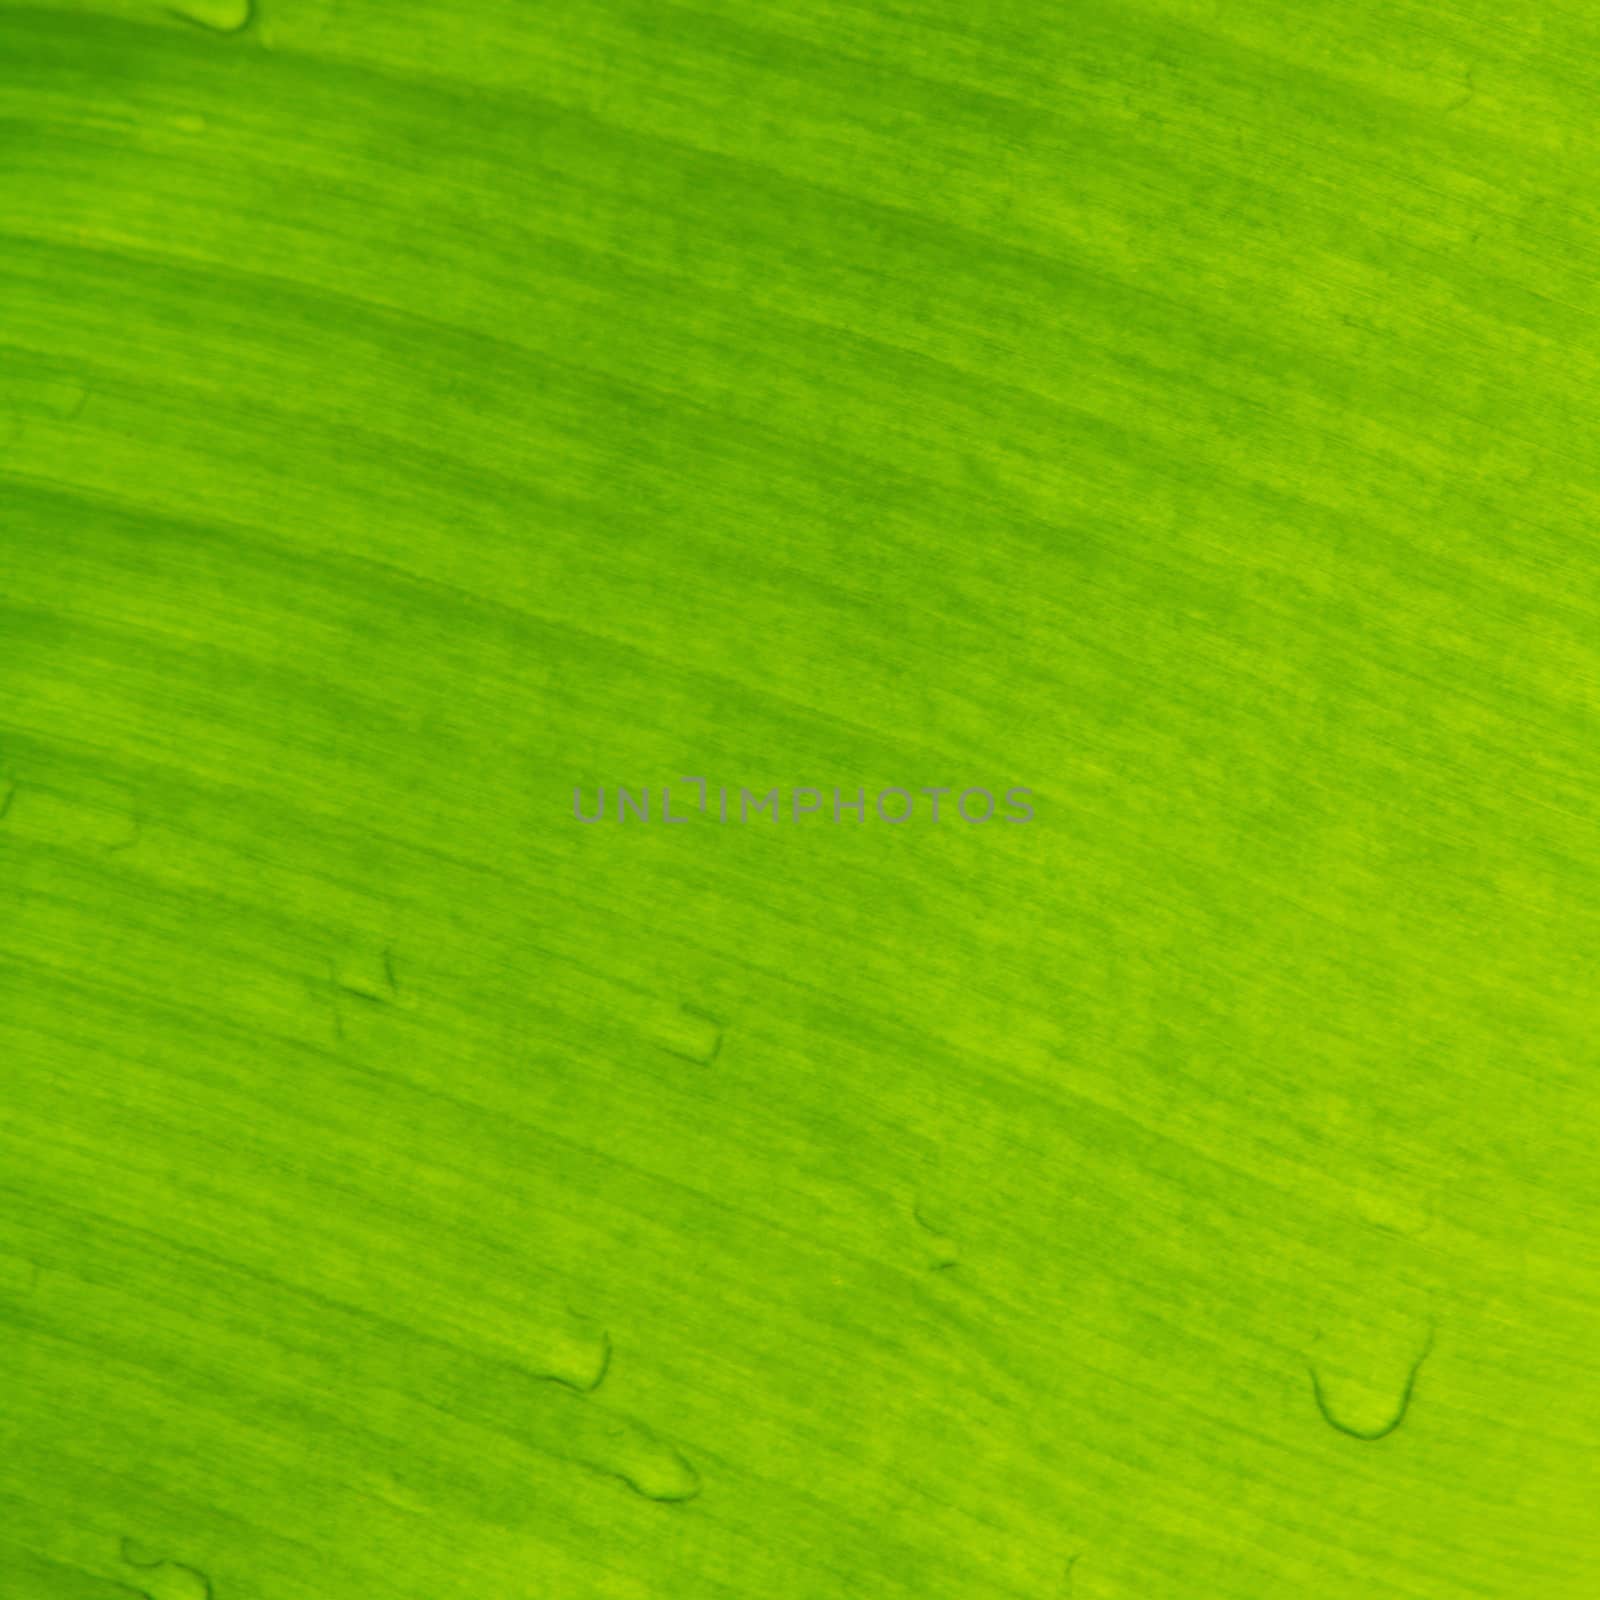 Banana leaf background with lines and water drop